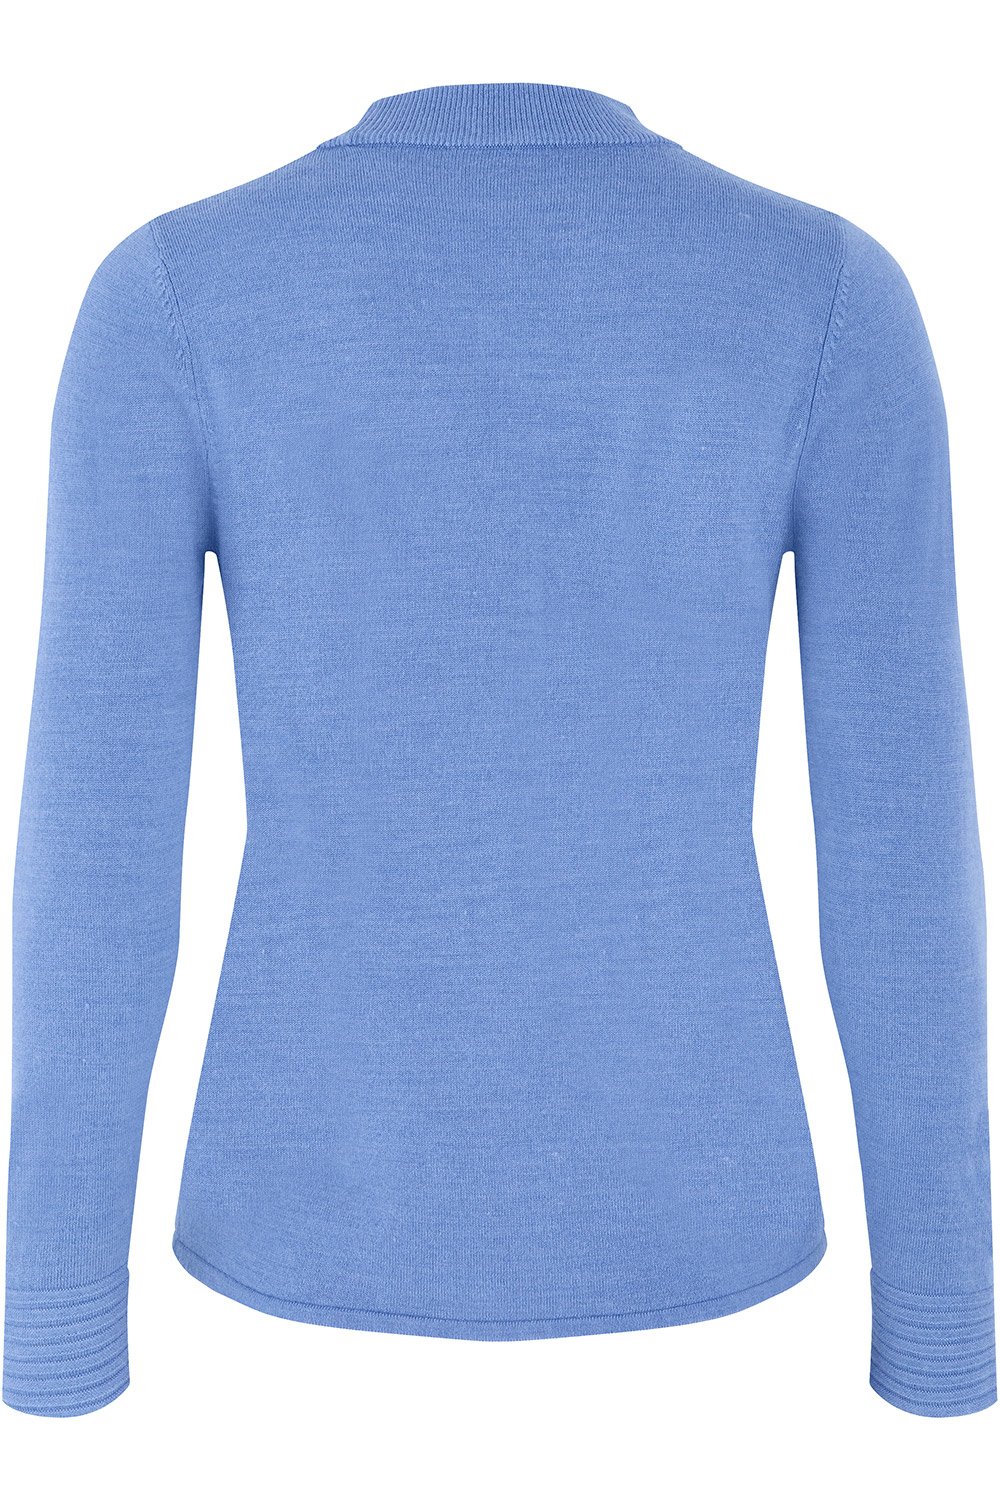 Supersoft Turtle Neck Jumper With Ripple Cuff Detail